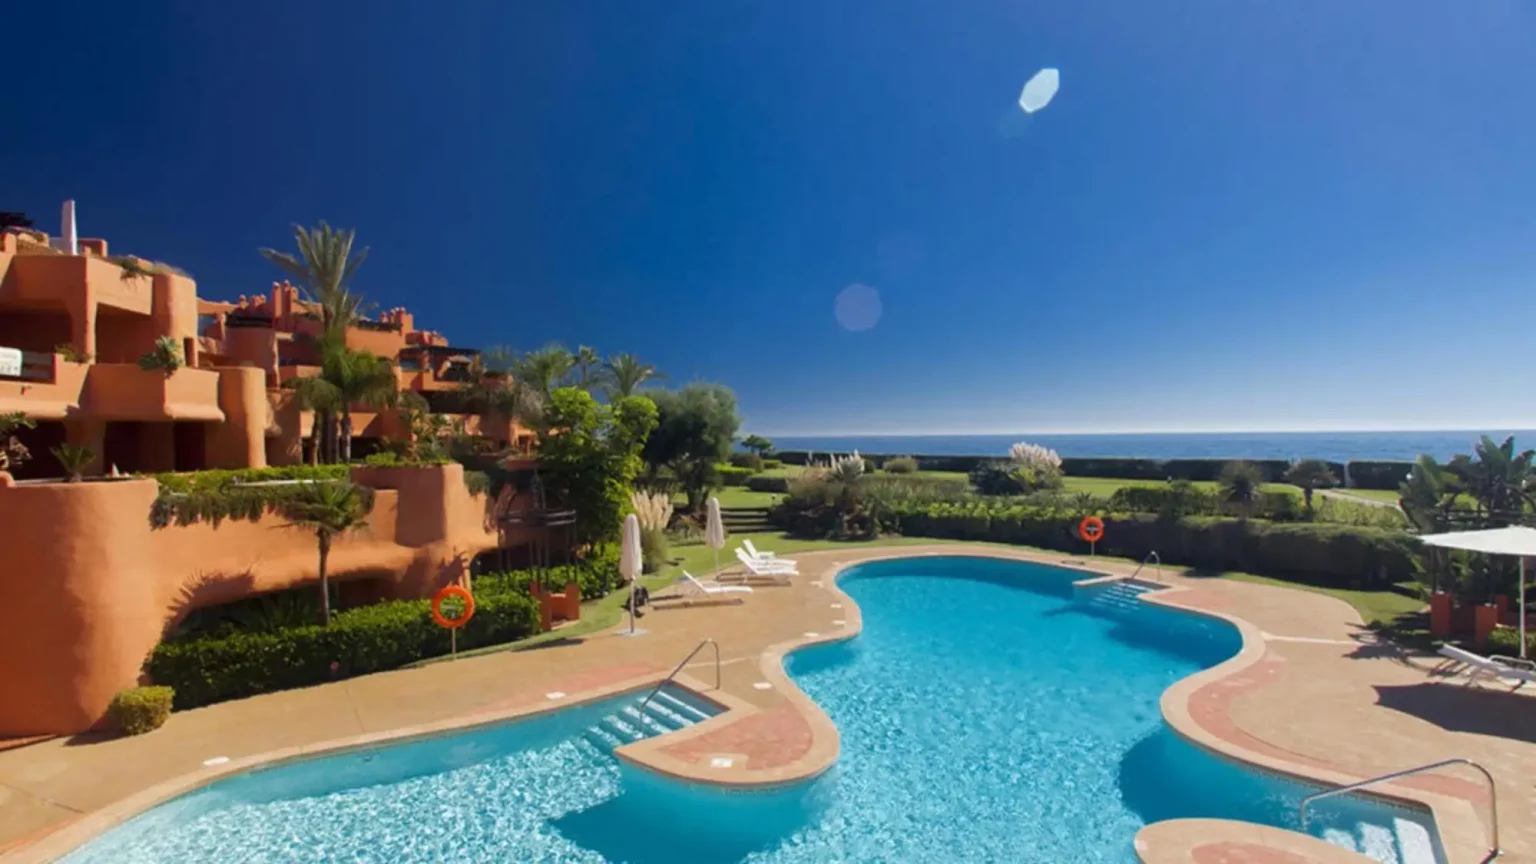 Beautiful Sea View from Los Monteros Beach Apartments